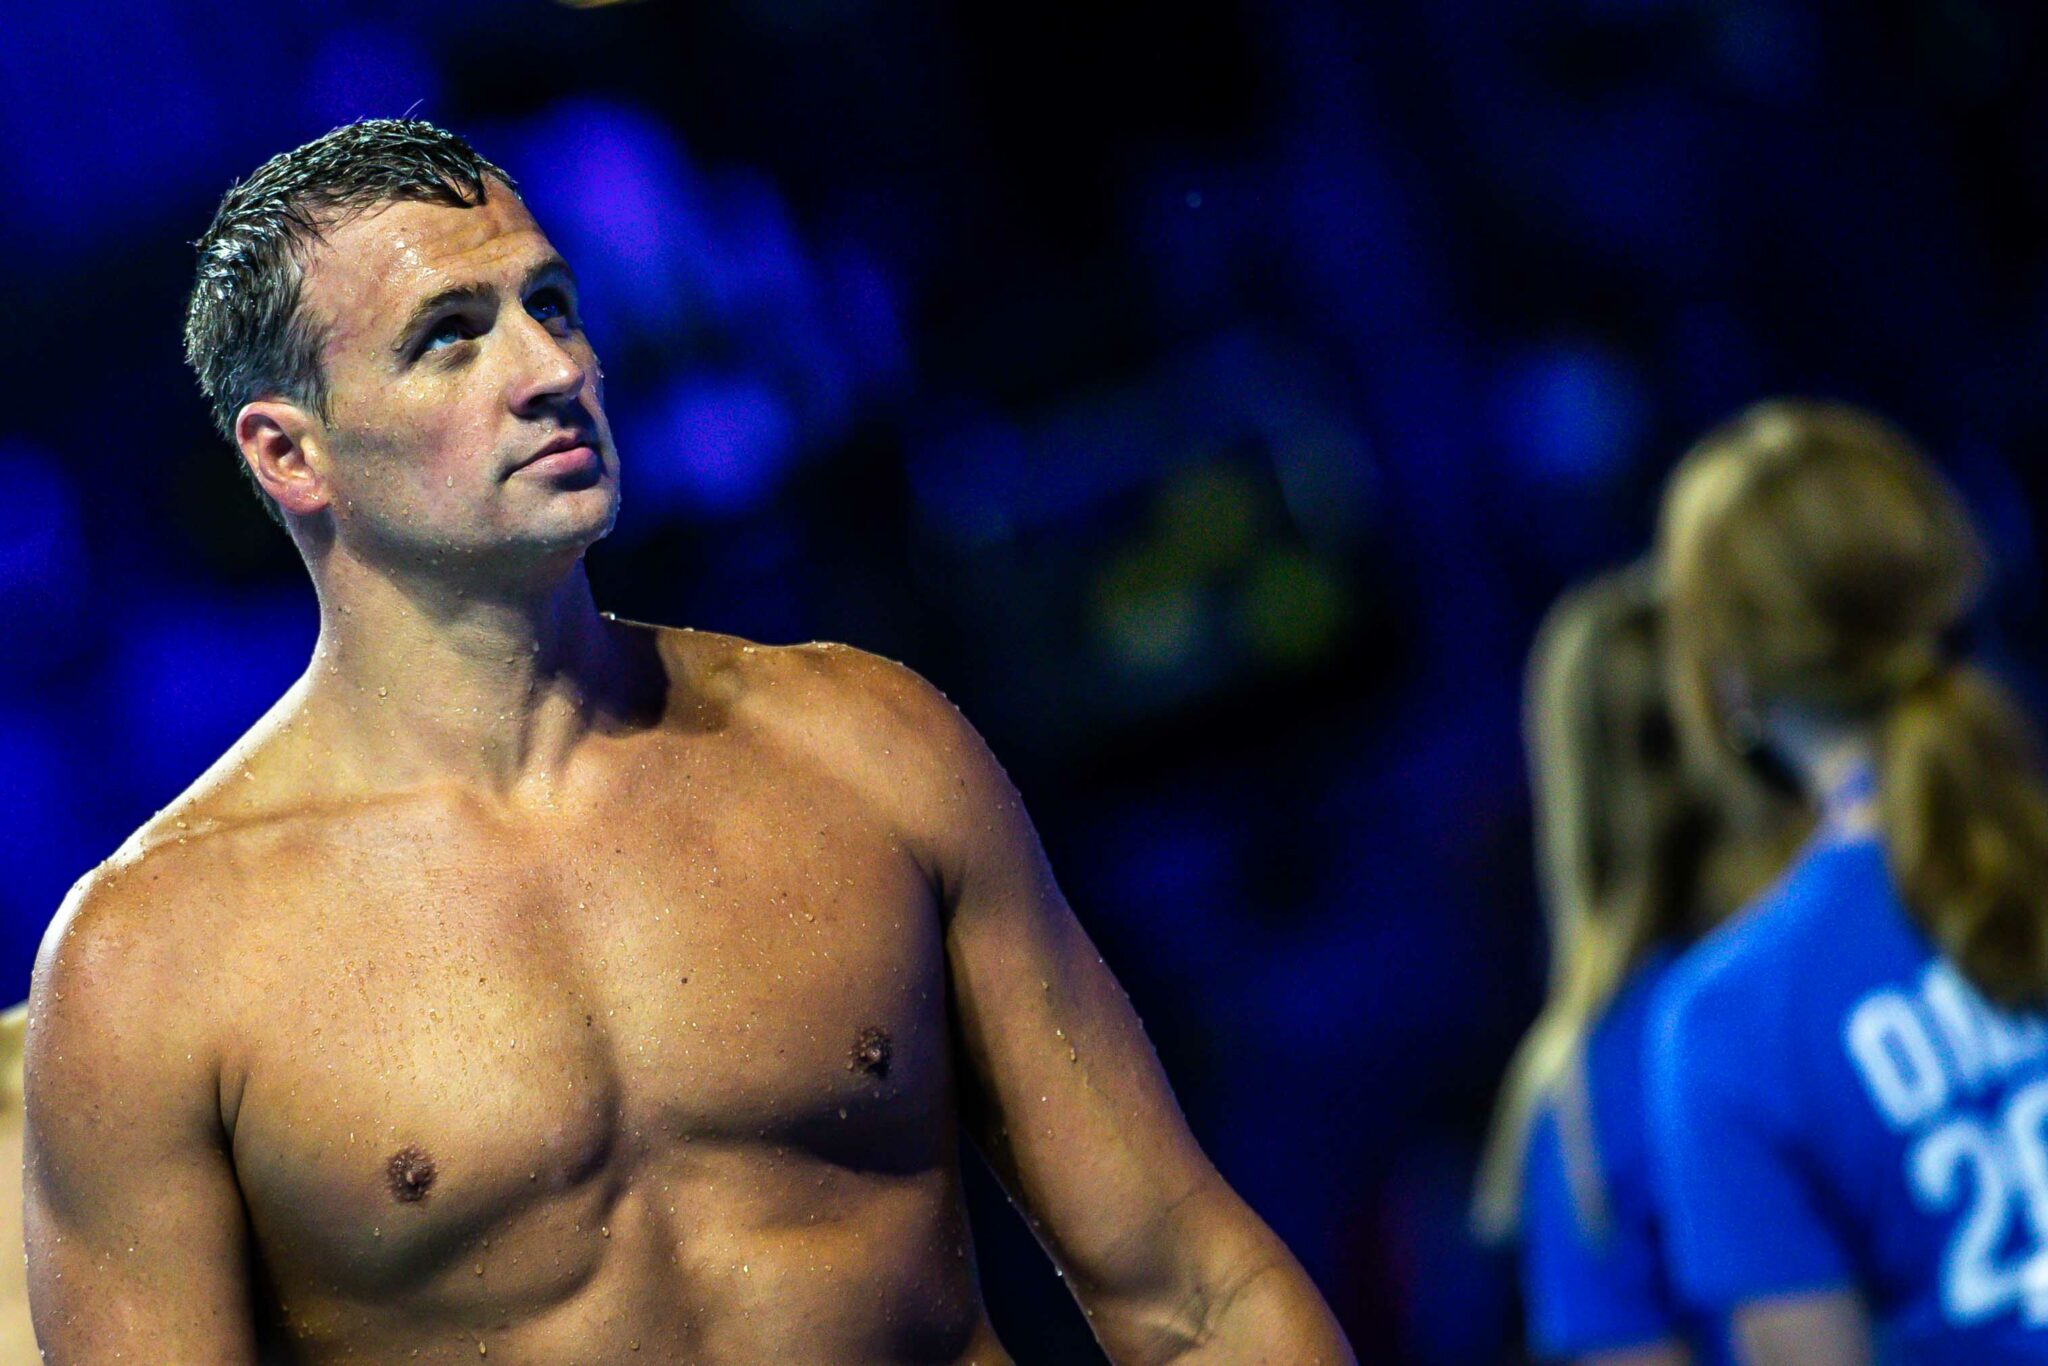 World Record Holder Ryan Lochte Places 7th in 200 IM, Misses Olympic Team